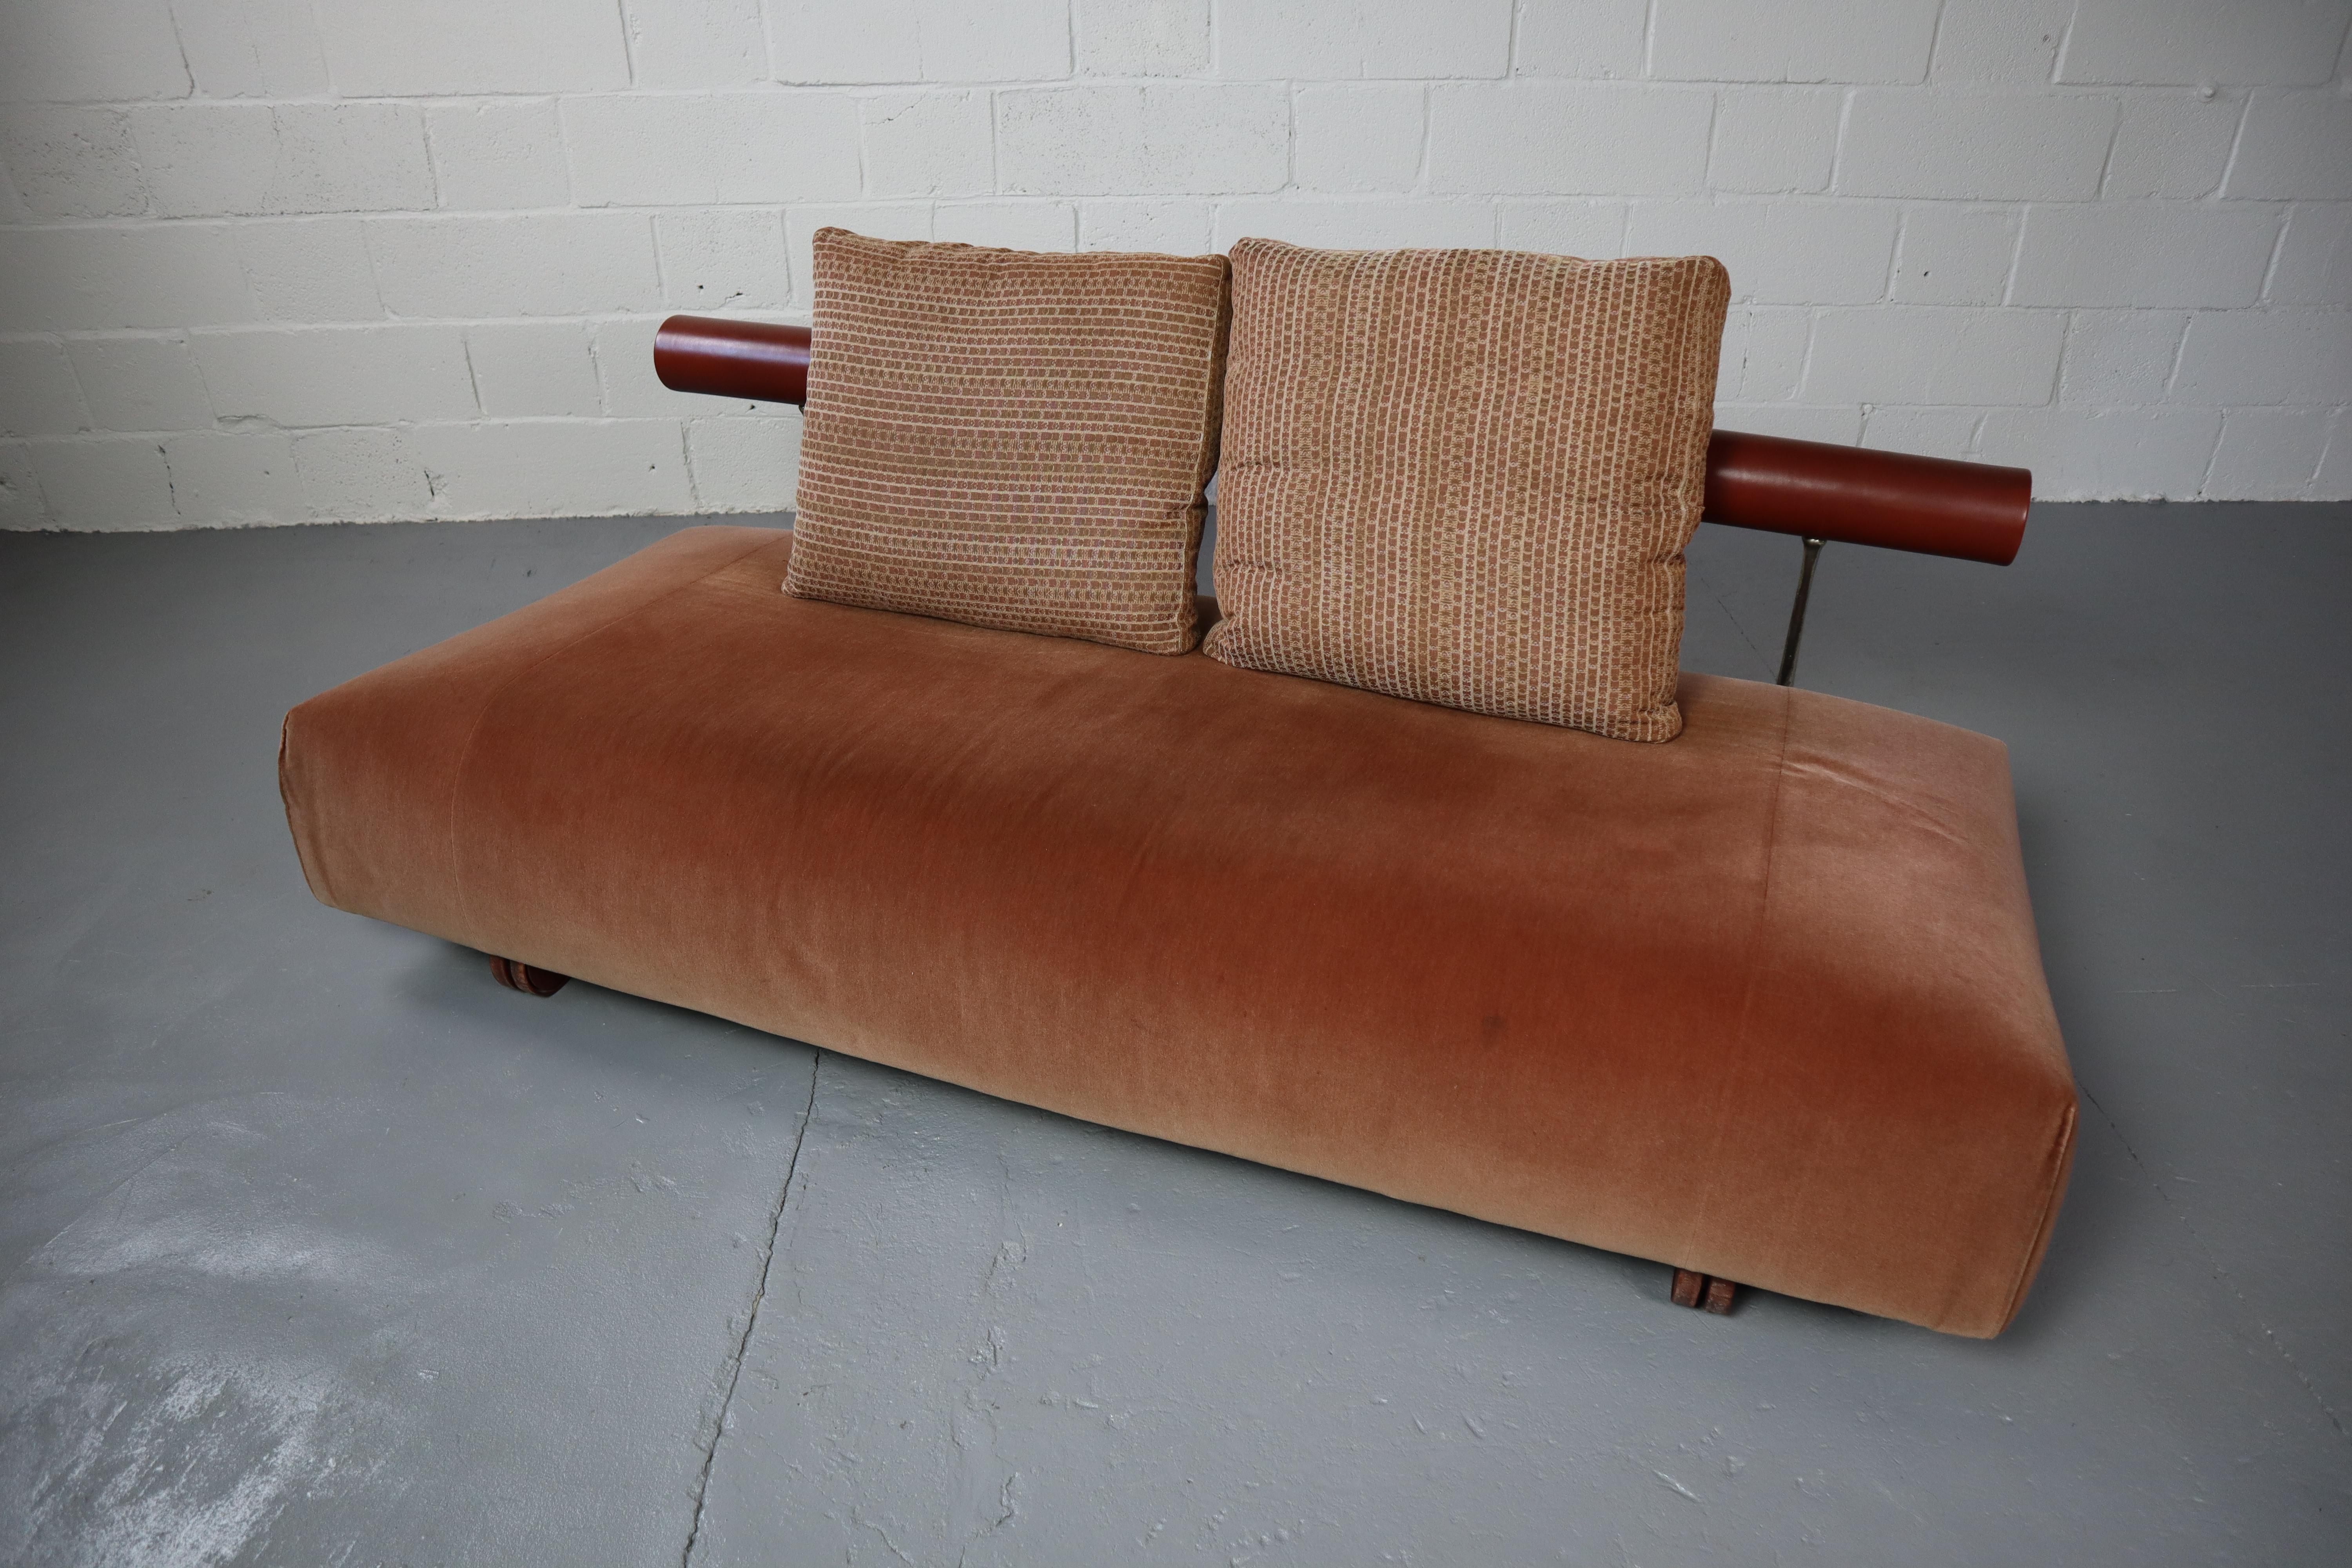 This is a very rare sofa, model Baisity, created in 1986 by Antonio Citterio who won the Compasso d’oro a year later with this design. Comfortable seat. The sofa has two wheels upfront so it can easily moved to another position in your home.